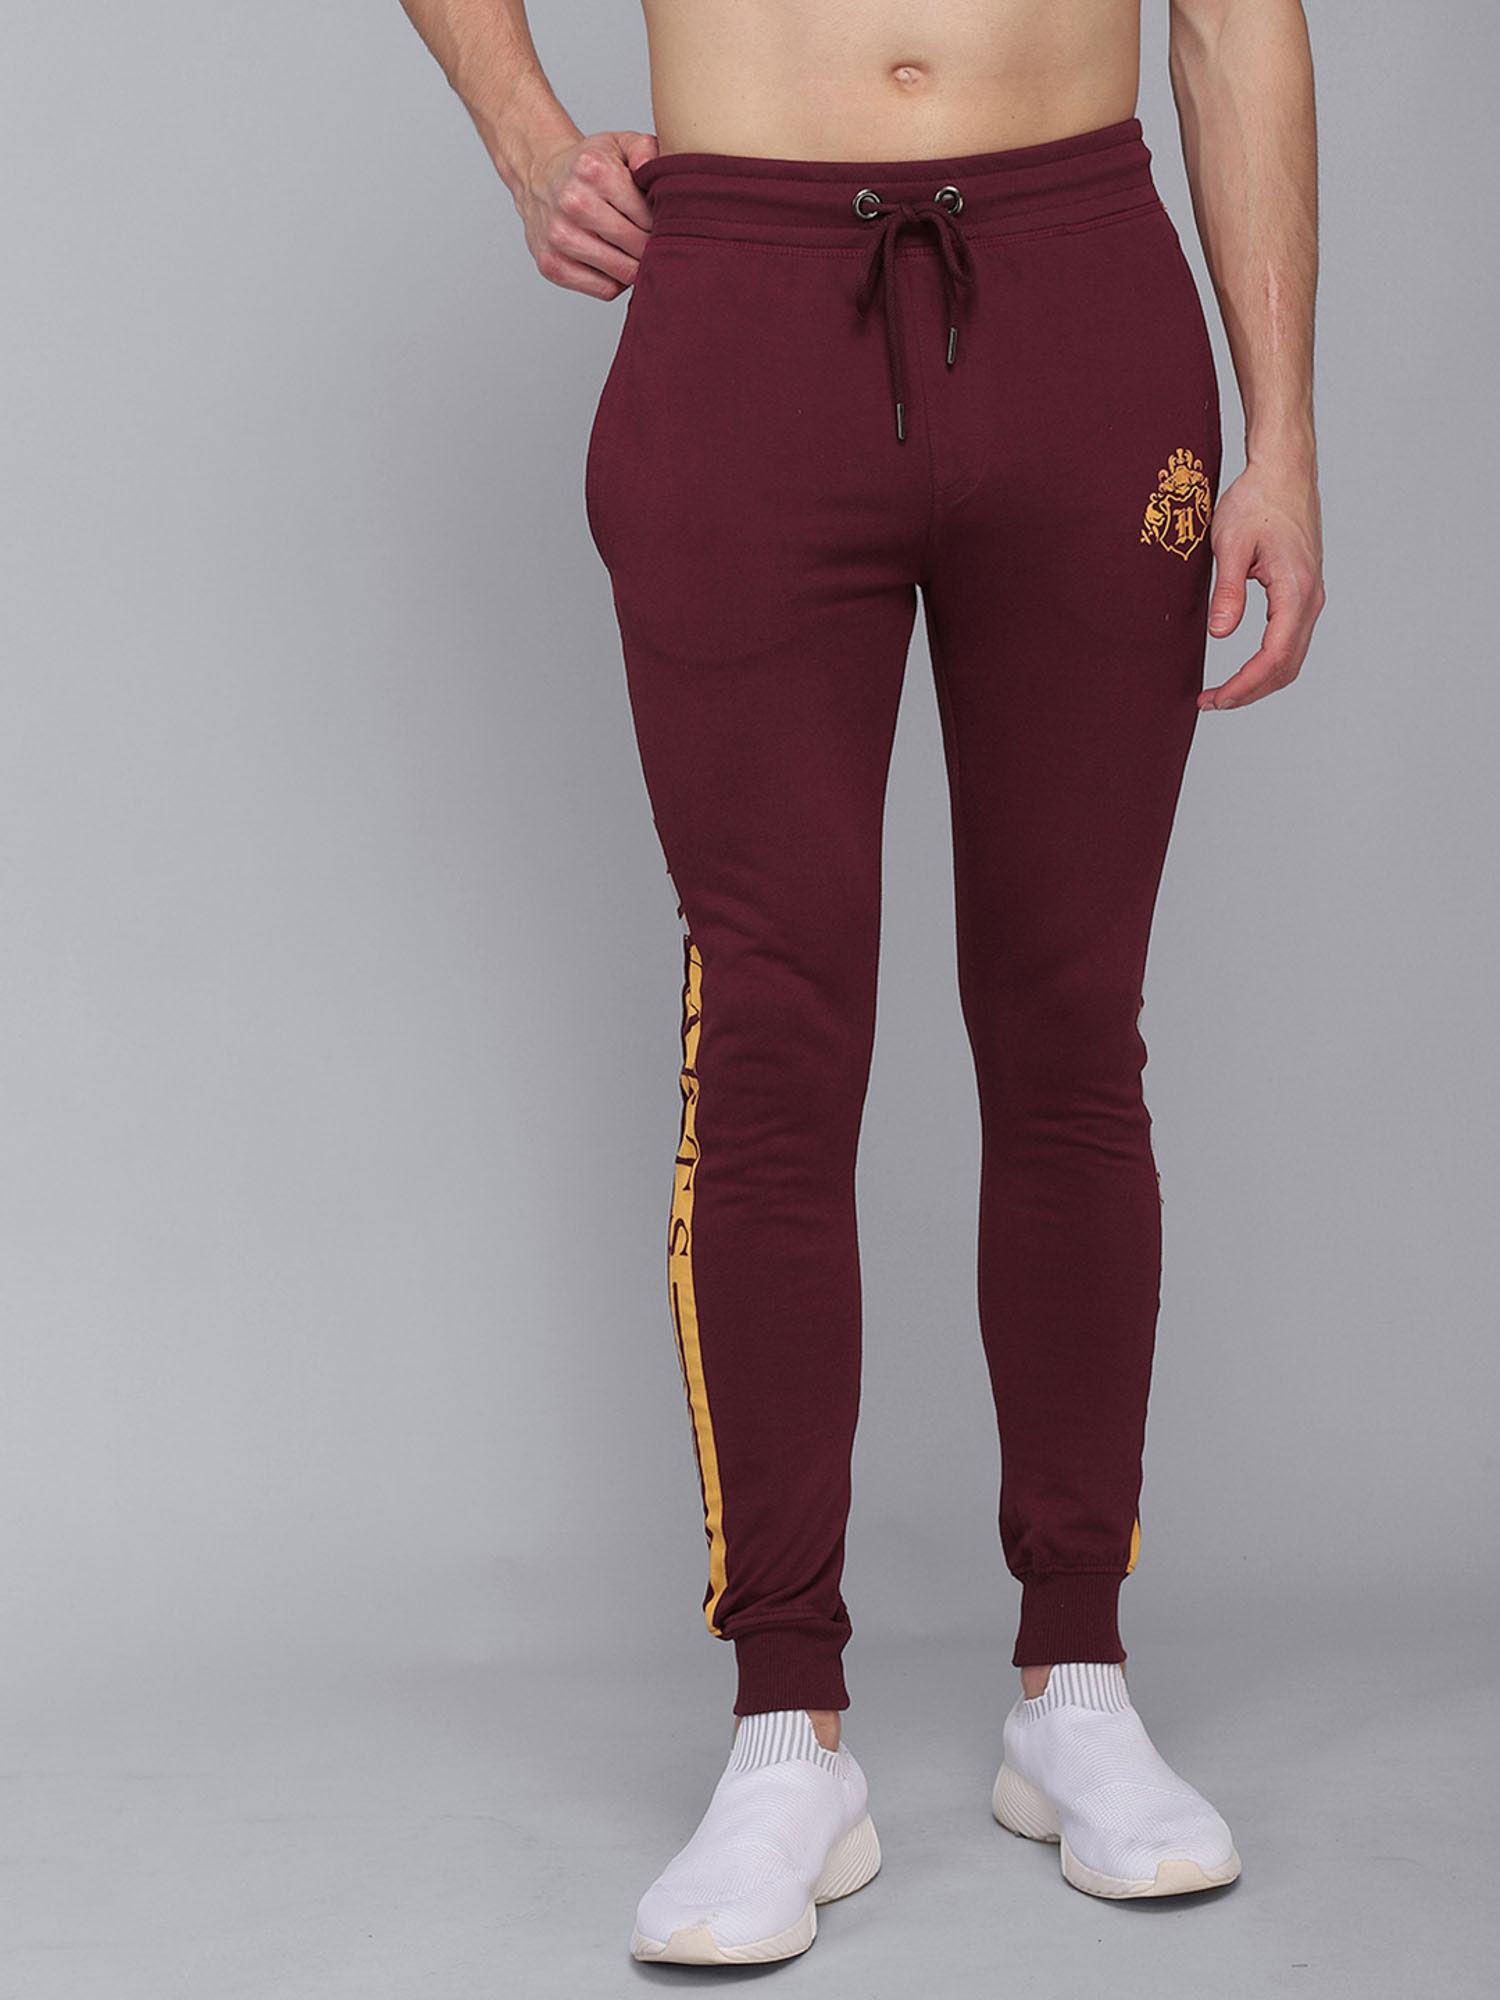 harry potter featured joggers for men